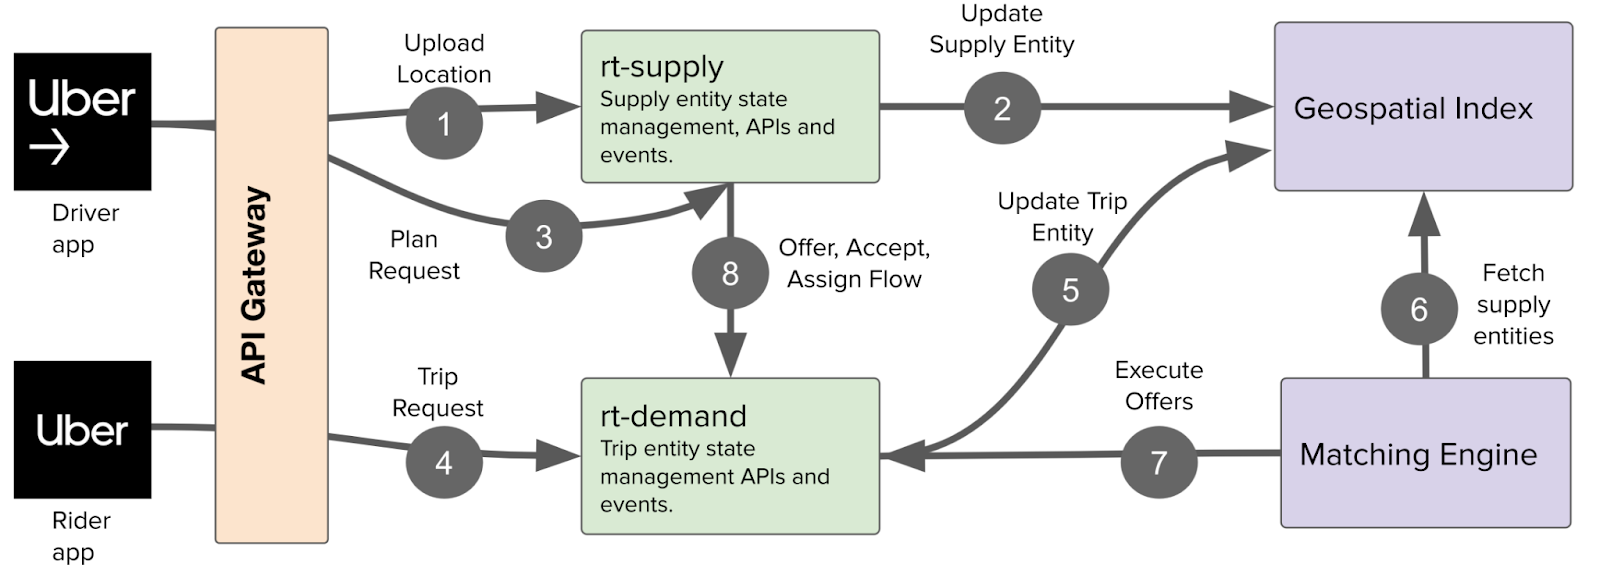 Uber's Fulfillment Platform: Ground-up Re-architecture to Accelerate Uber's  Go/Get Strategy | Uber Blog